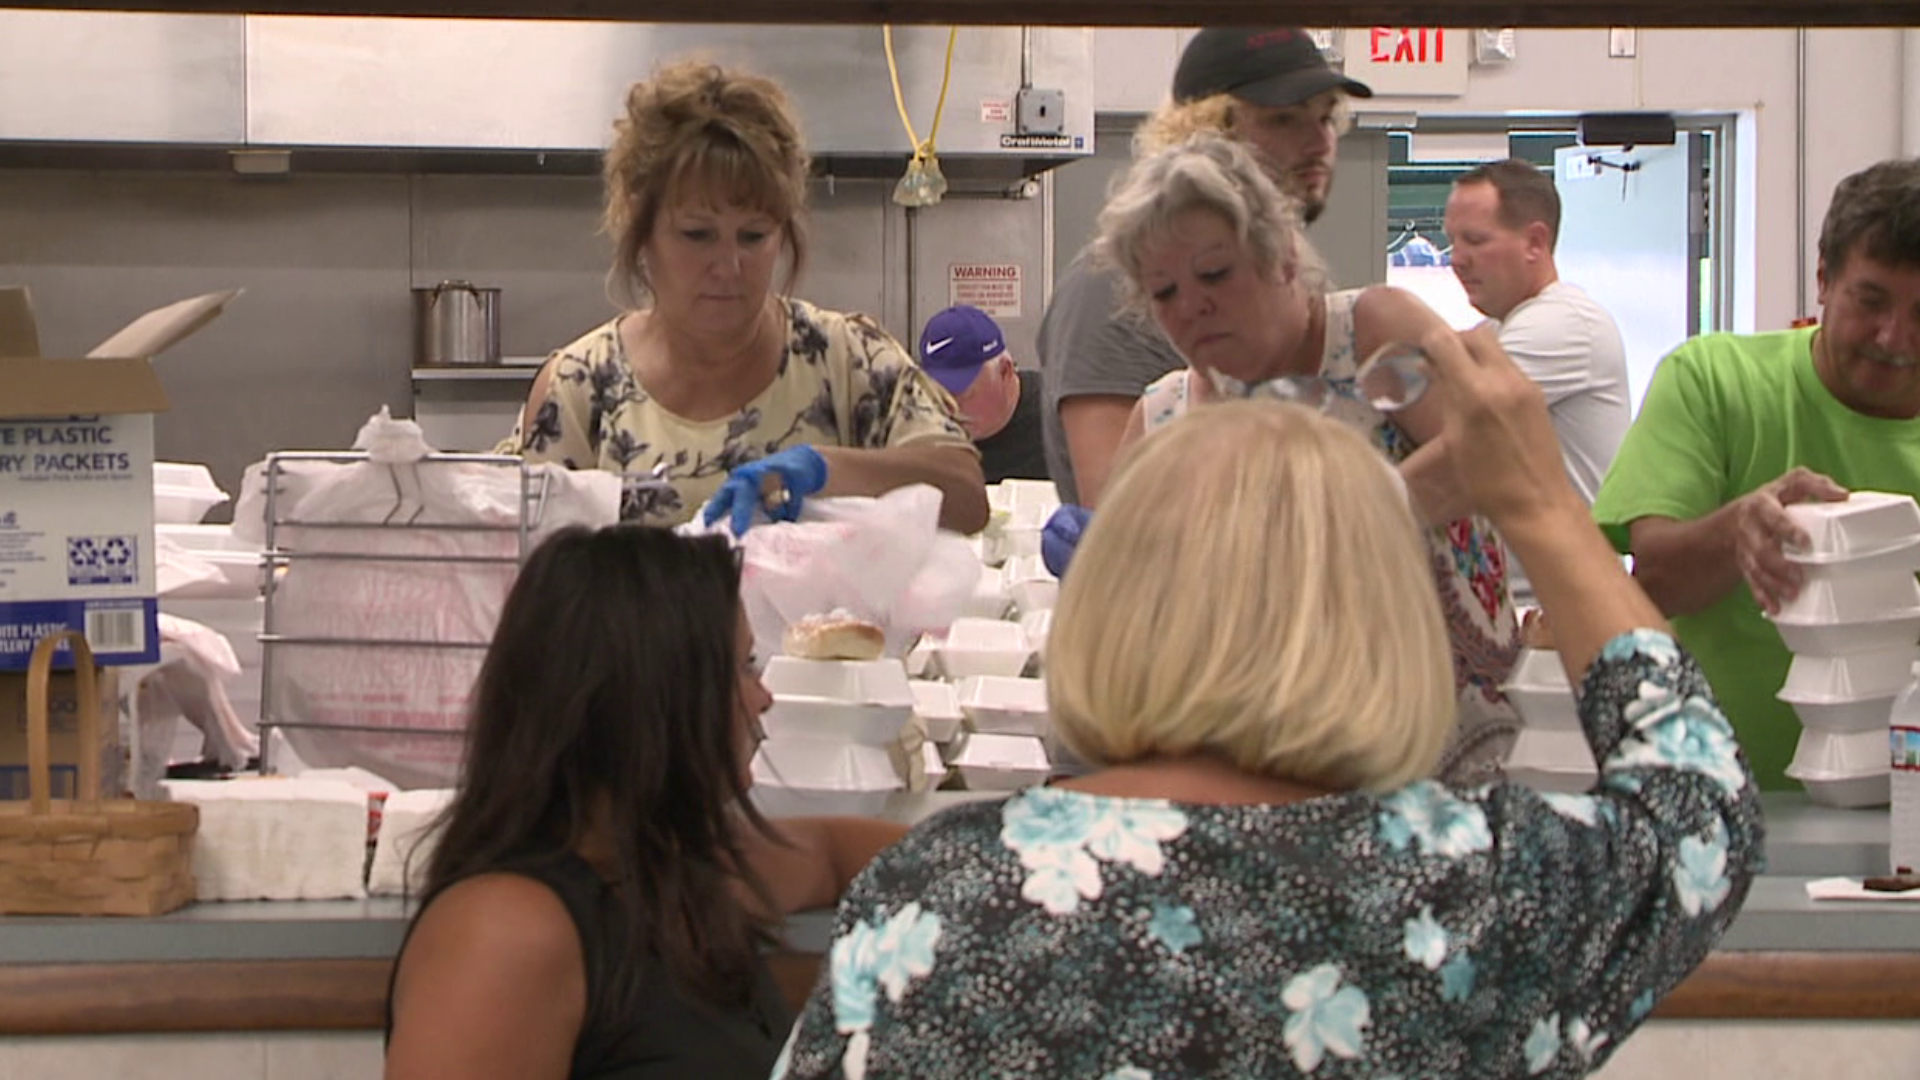 The takeout pasta dinner helped raise funds for the family's medical bills and travel expenses.